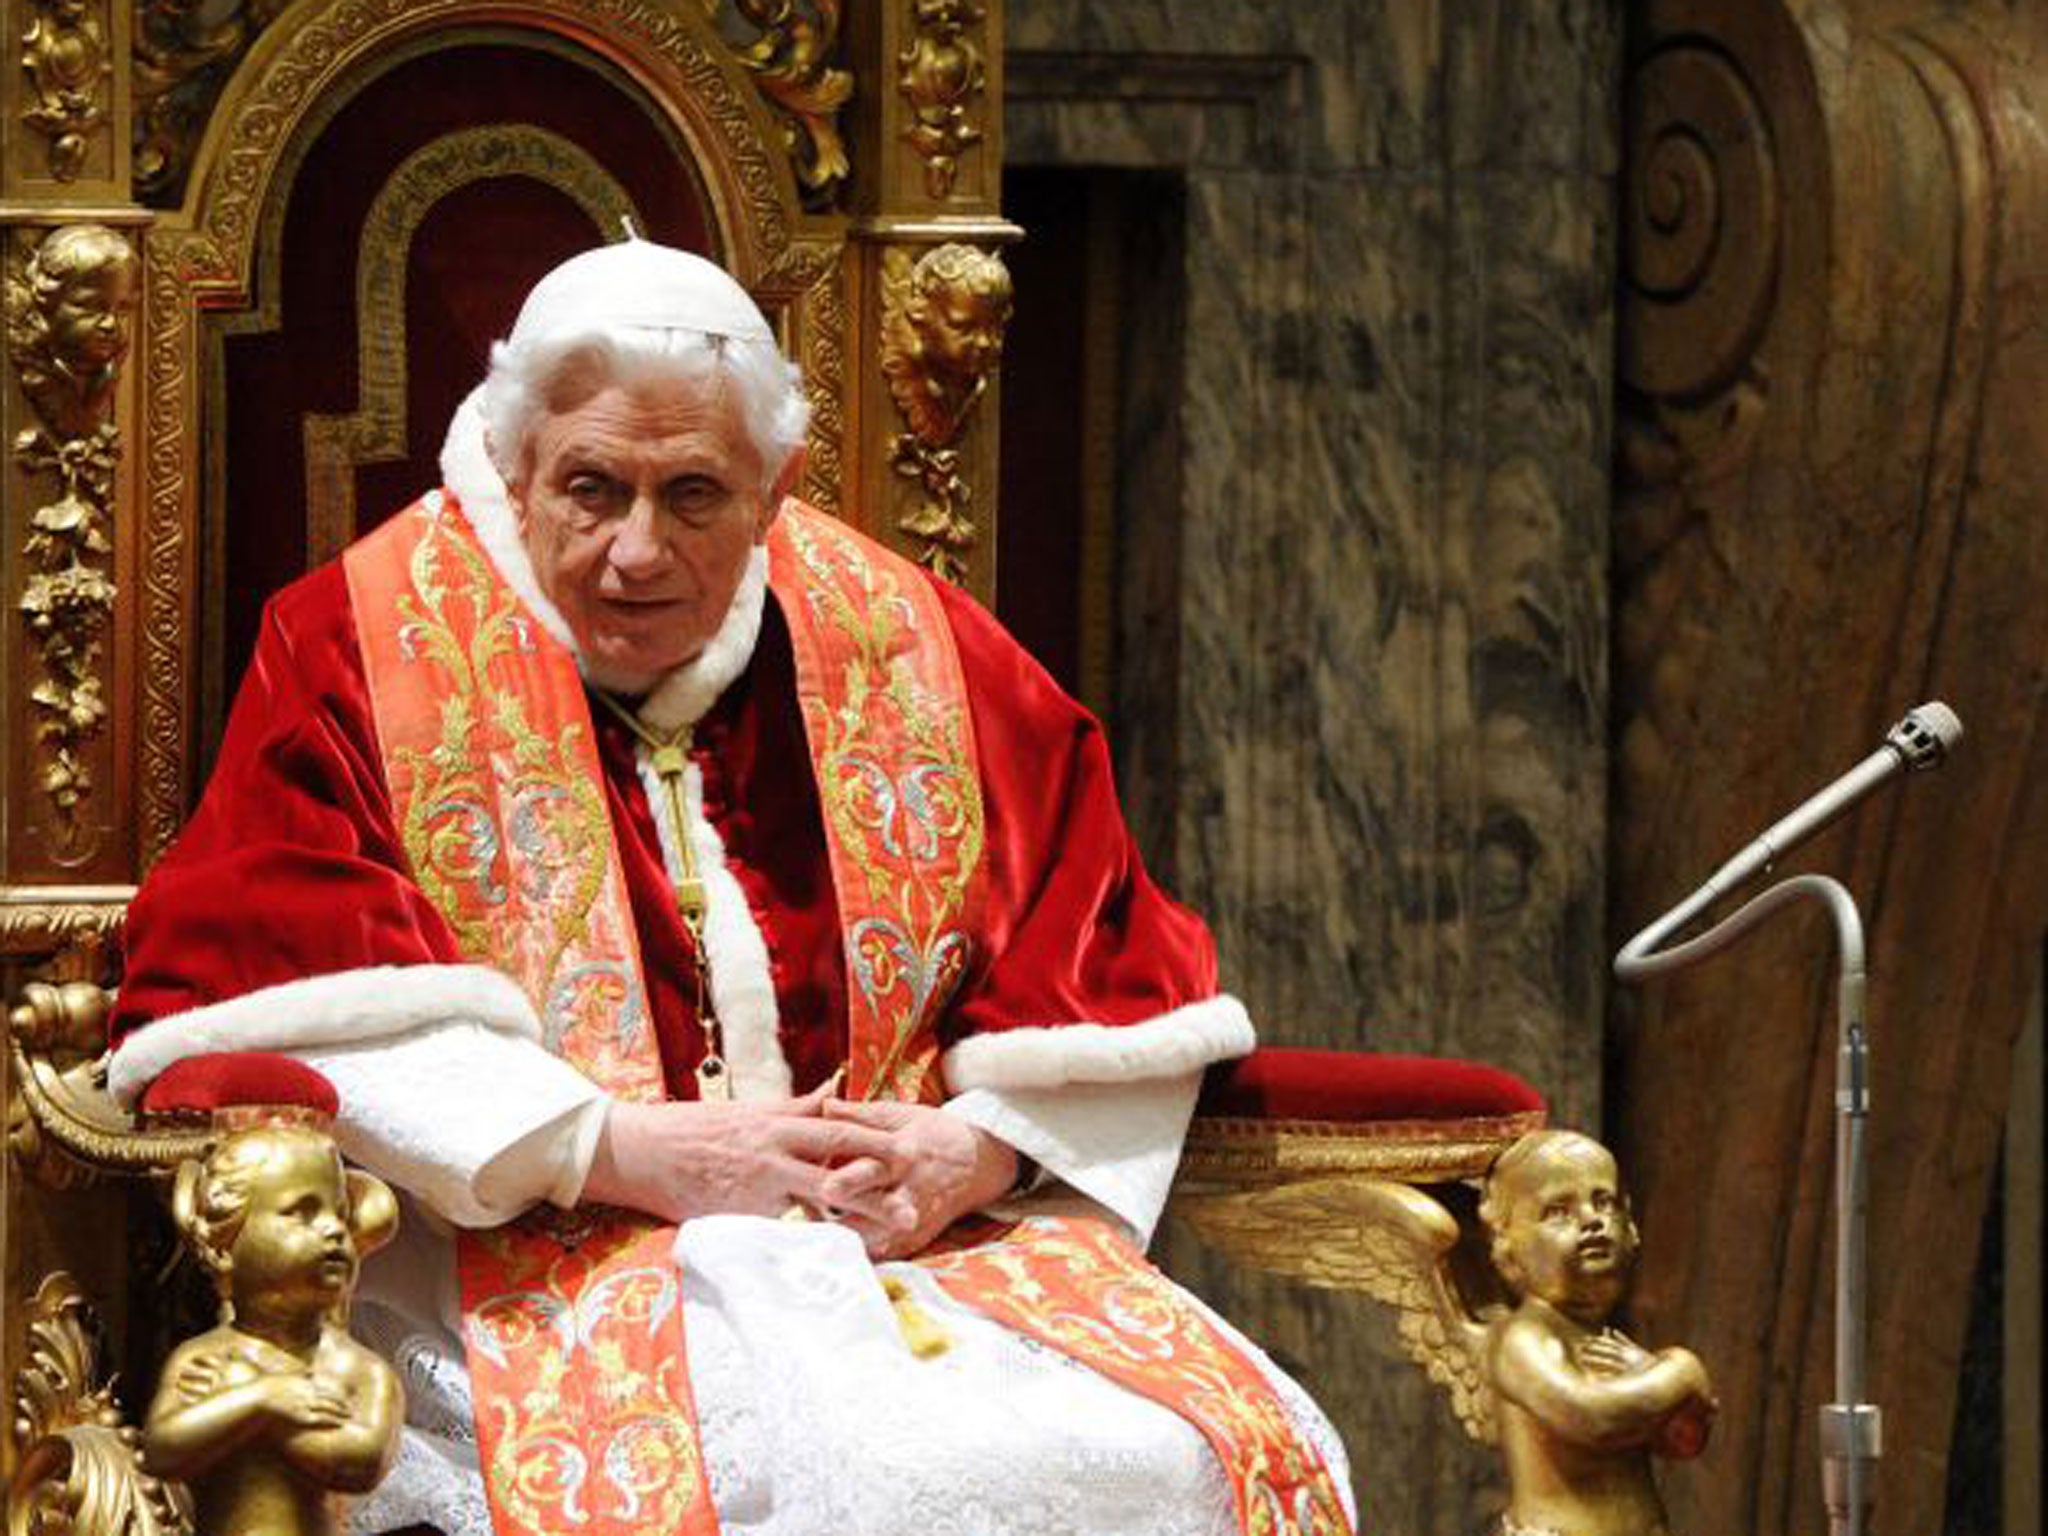 Pope Benedict appears willing to forge alliances with other faiths over same-sex marriages